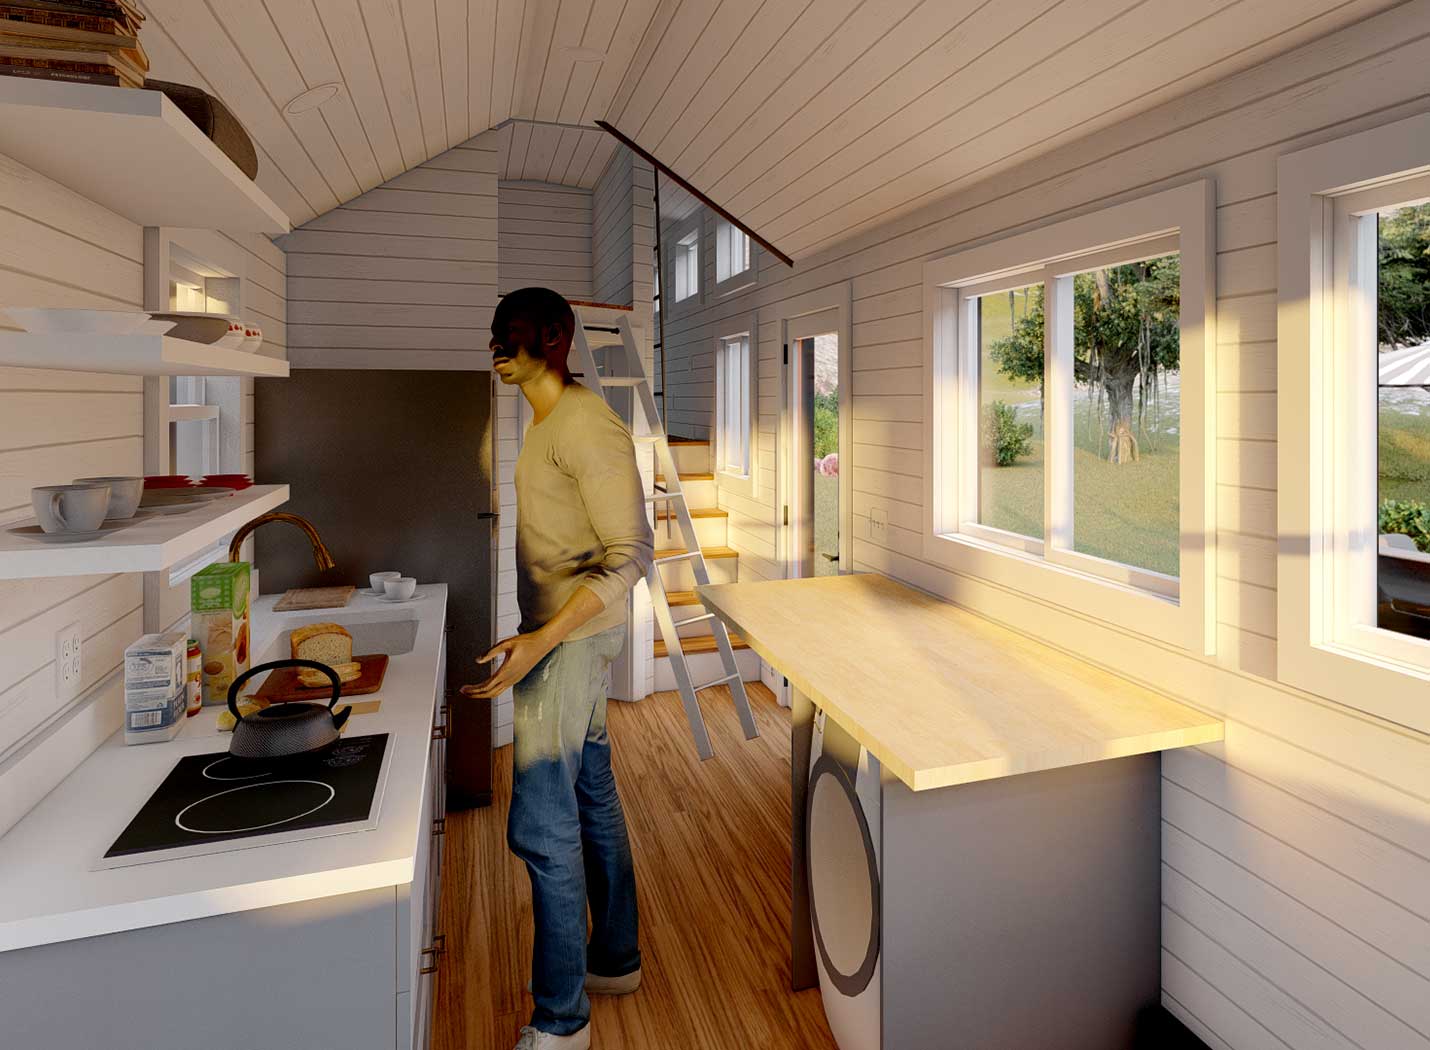 Interior of Majesty Tiny Home, for sale as part of the Signature Series, showing someone cooking in the kitchen (3d model)